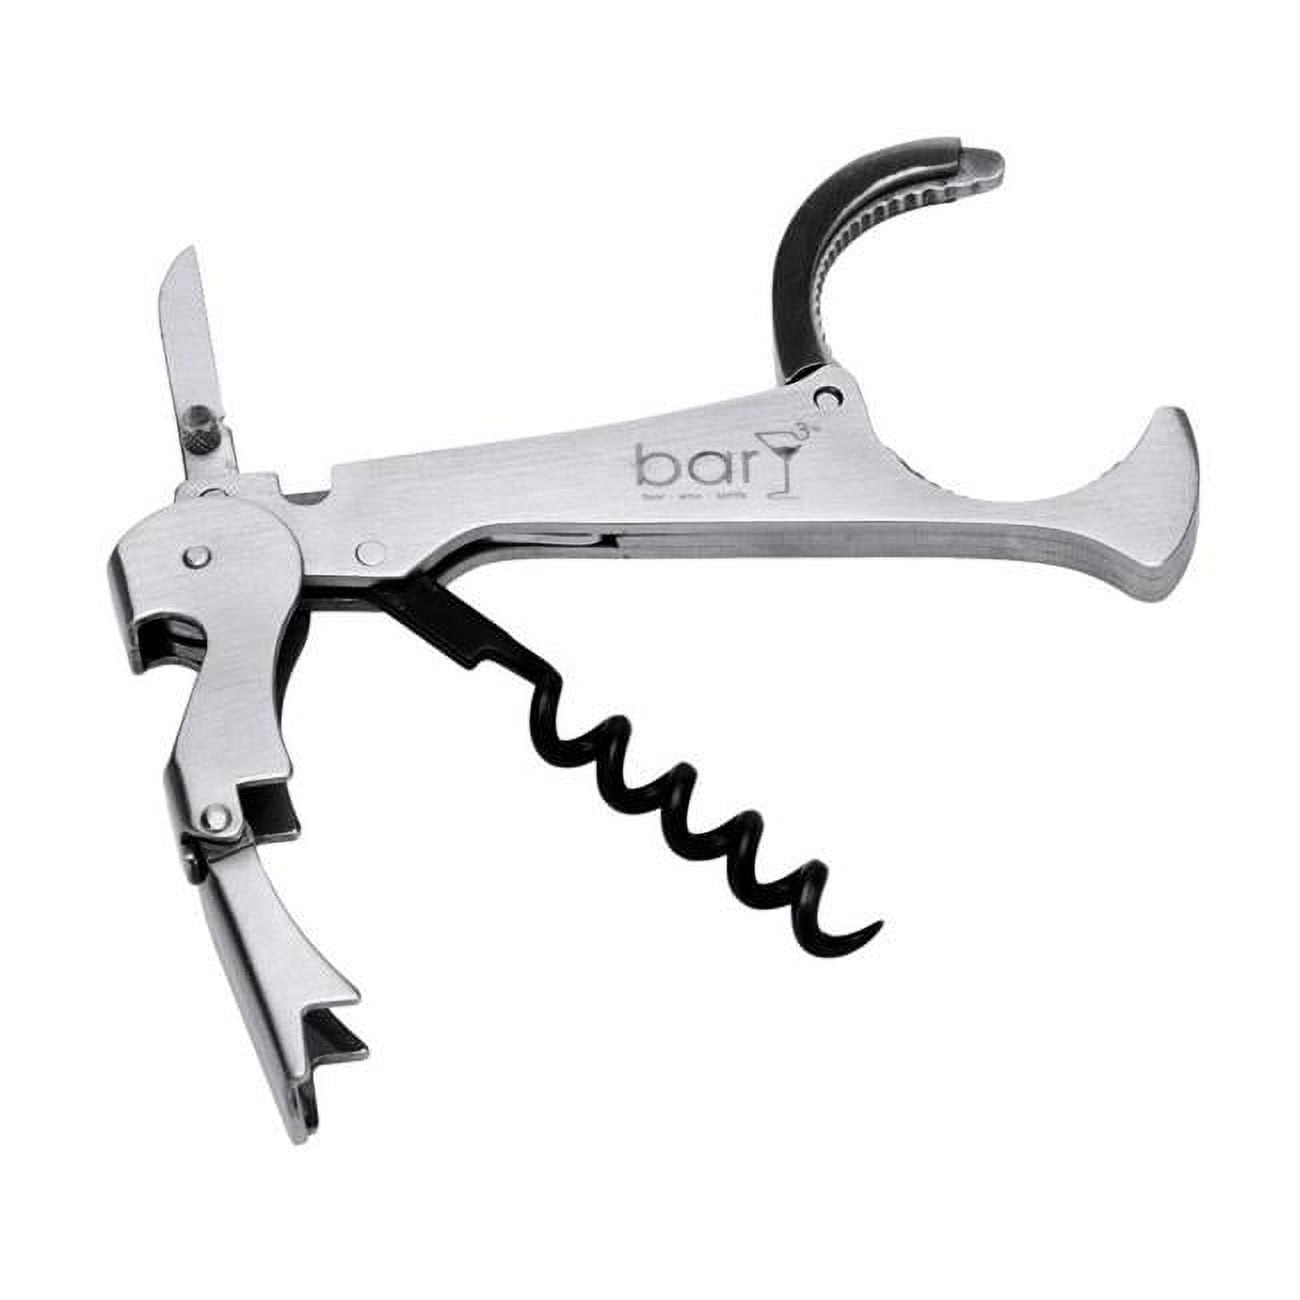 Picture of Bary3 6026568 Stainless Steel Waiters Corkscrew - Black & Silver